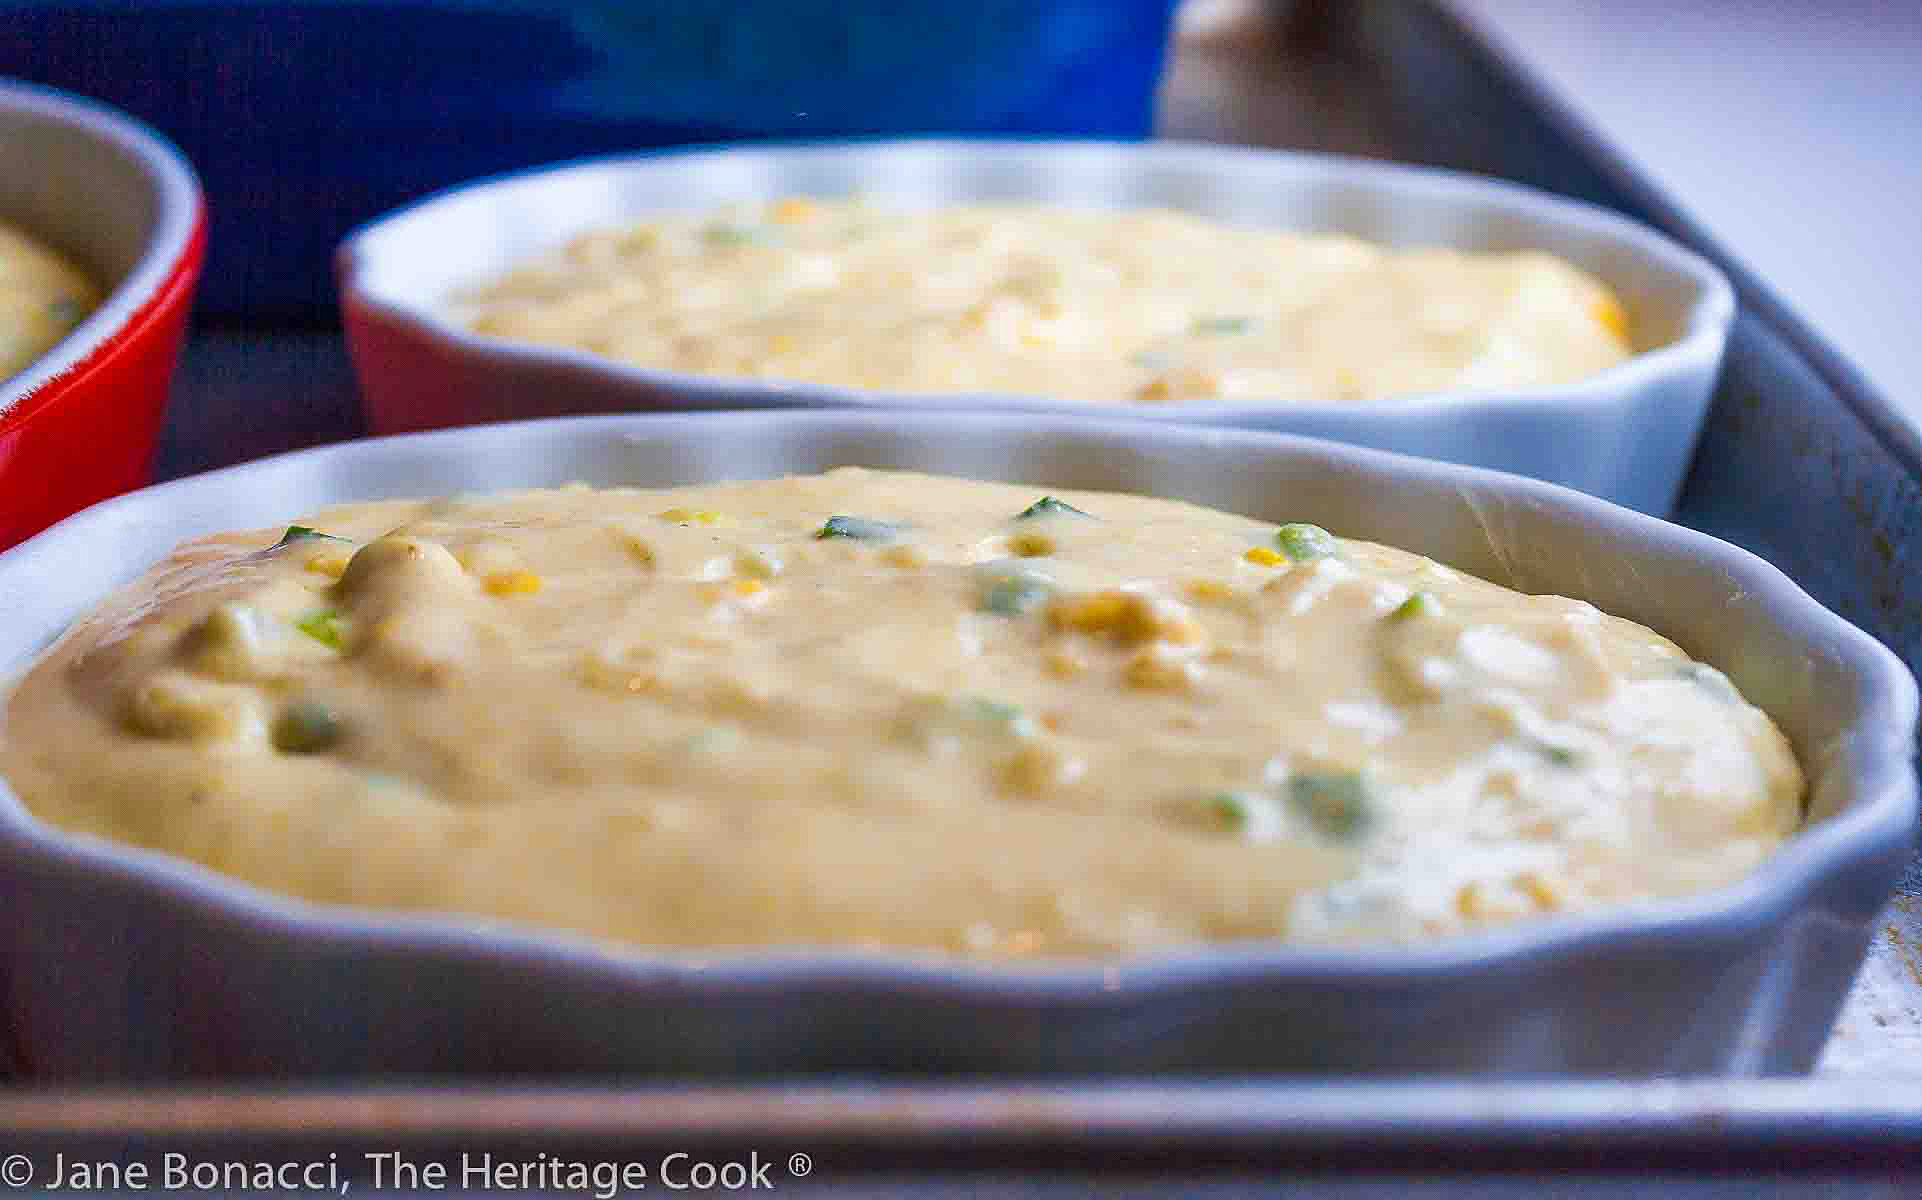 Au gratin dishes with batter in them ready for the oven. 